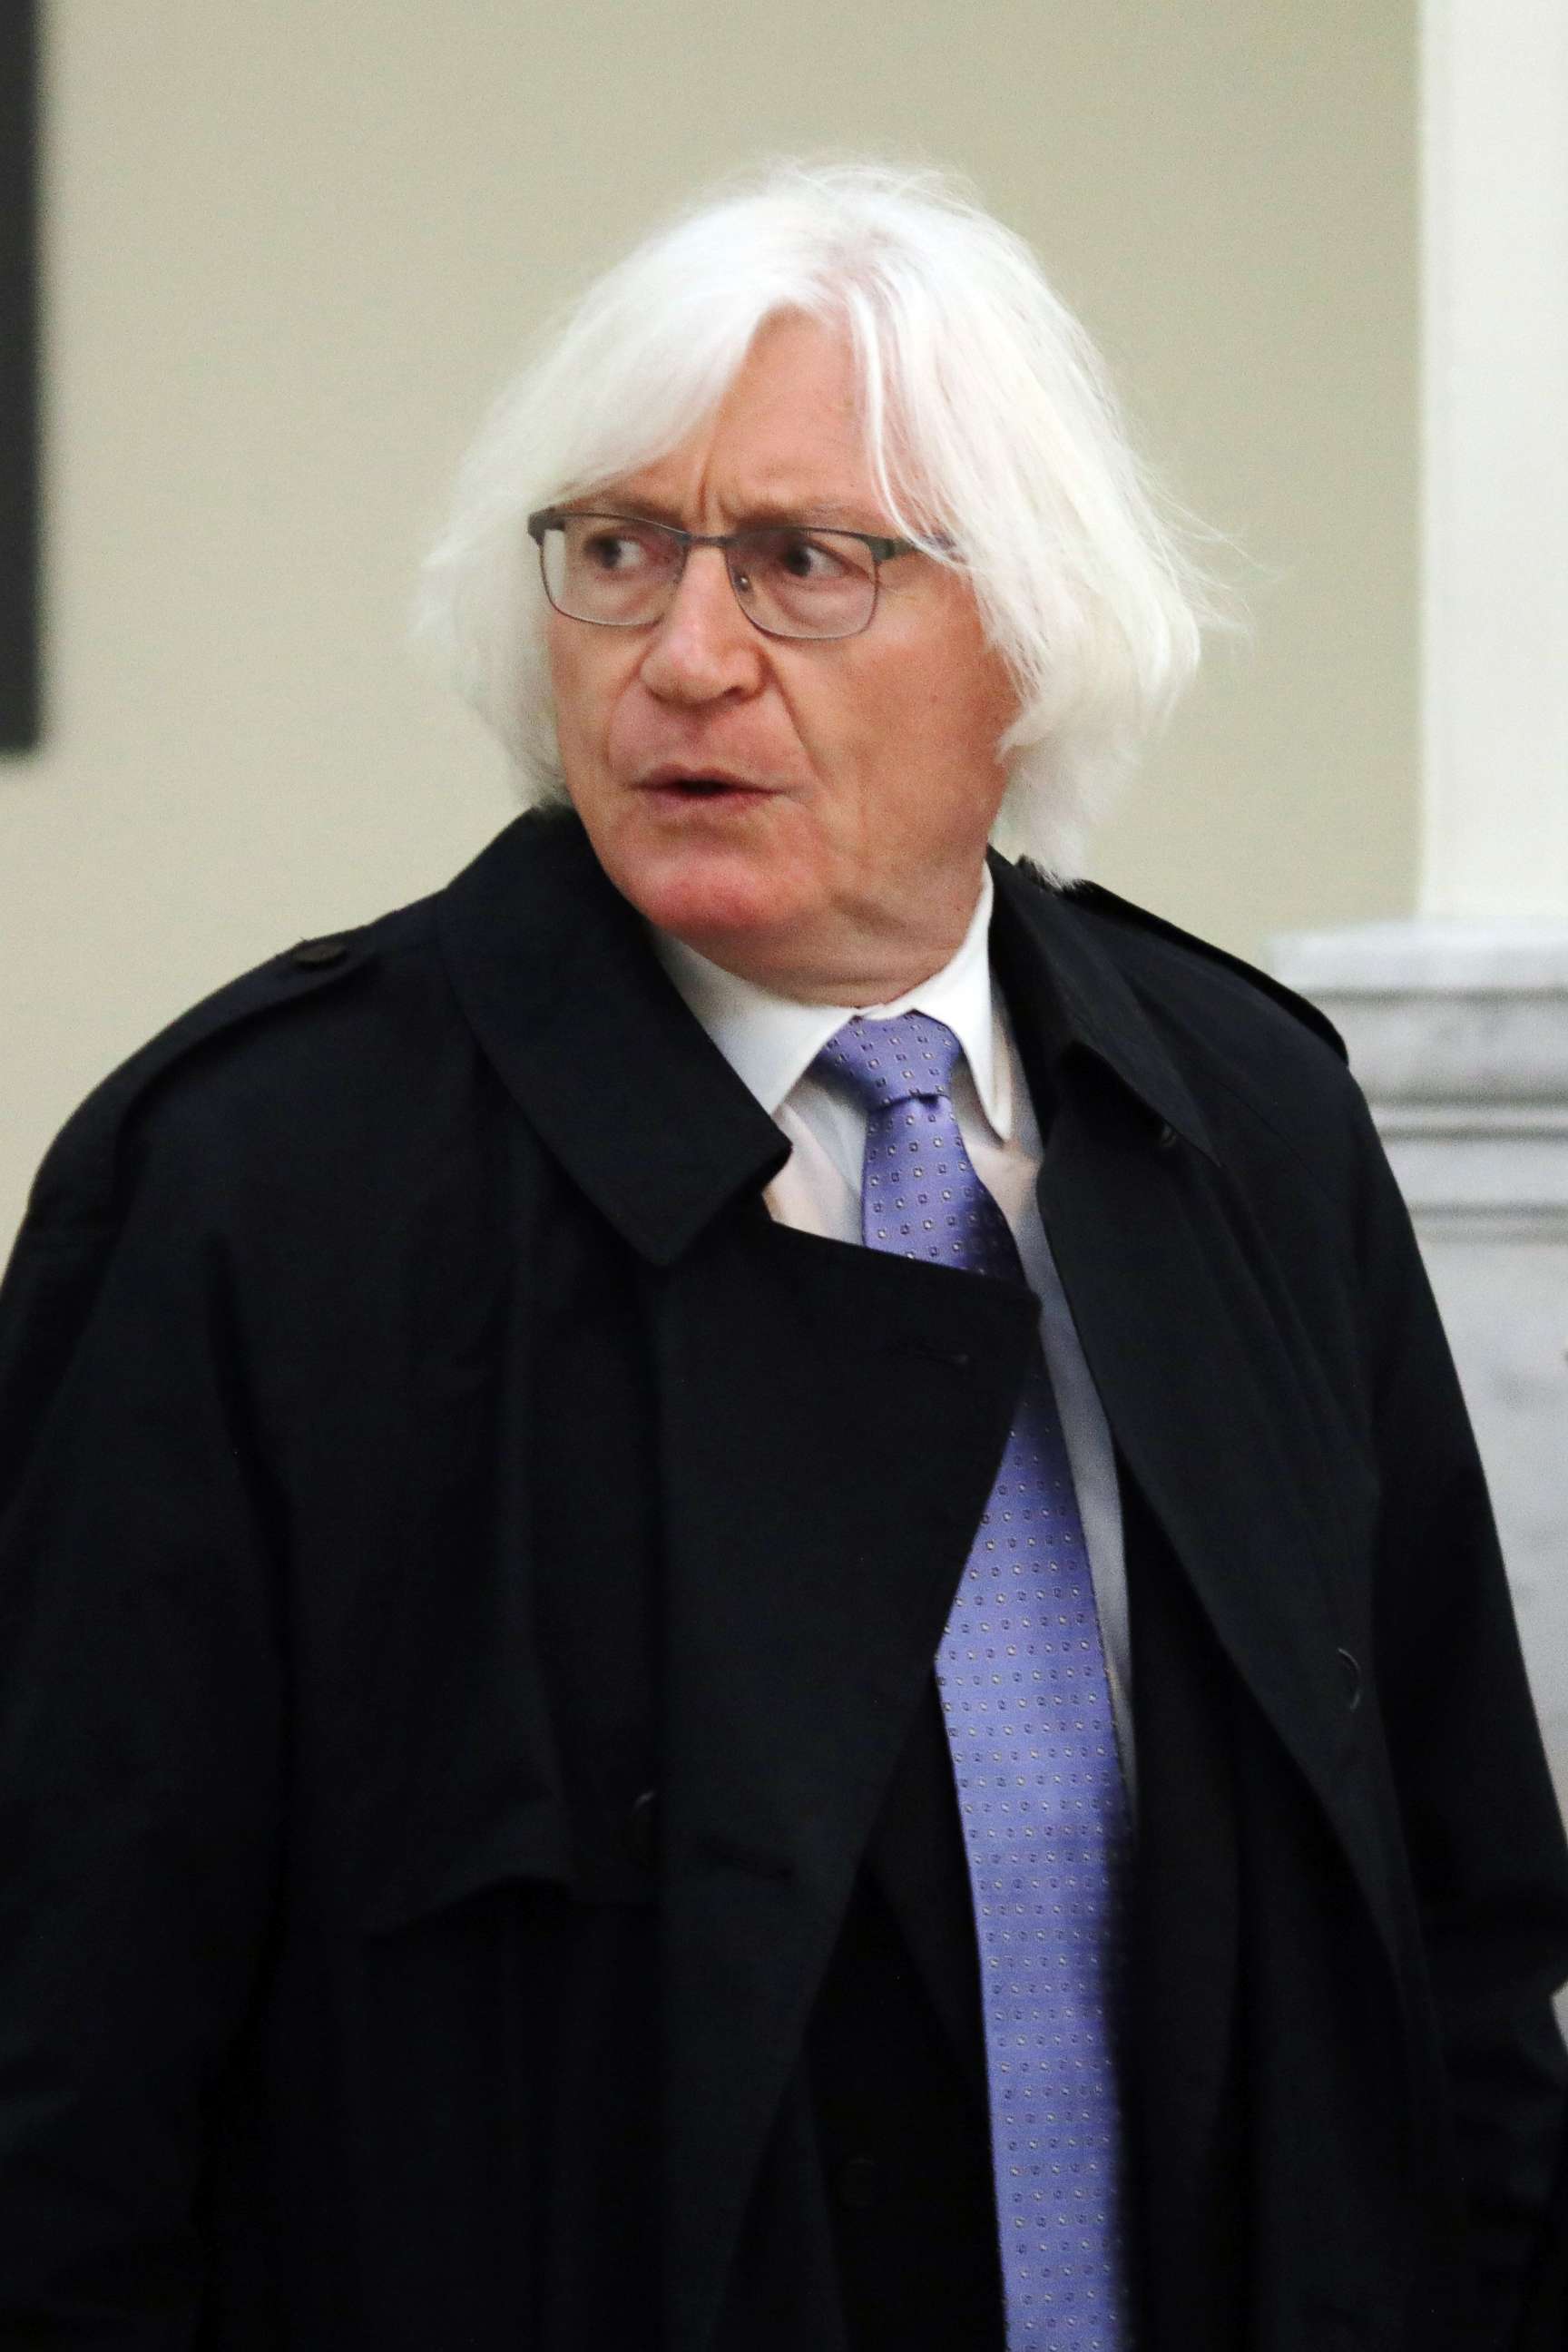 PHOTO: Tom Mesereau, lawyer for actor and comedian Bill Cosby, arrives at the Montgomery County Courthouse in Norristown, Pa., April 16, 2018.